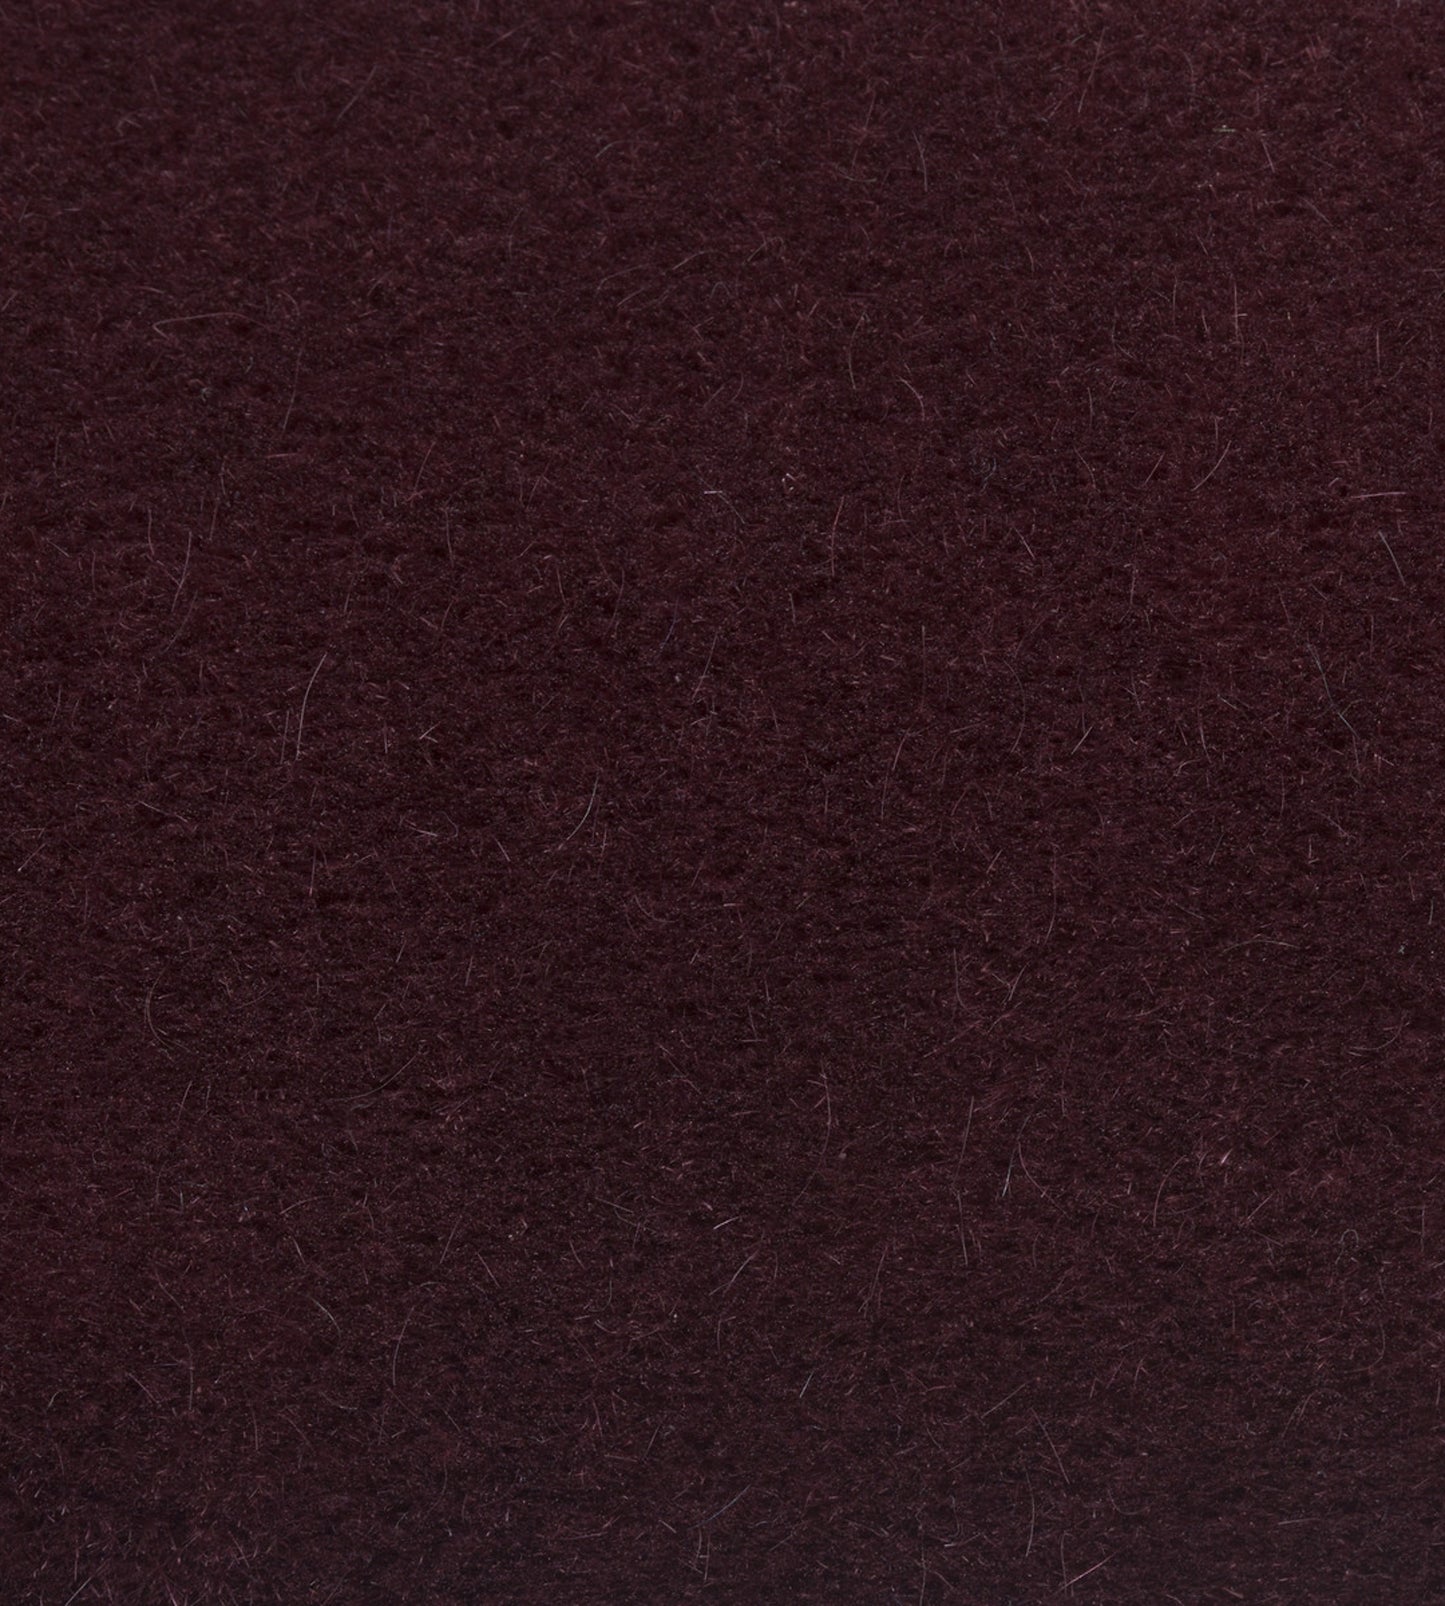 Purchase Old World Weavers Fabric Item VP 0182MAJE, Majestic Mohair Mulled Wine 1